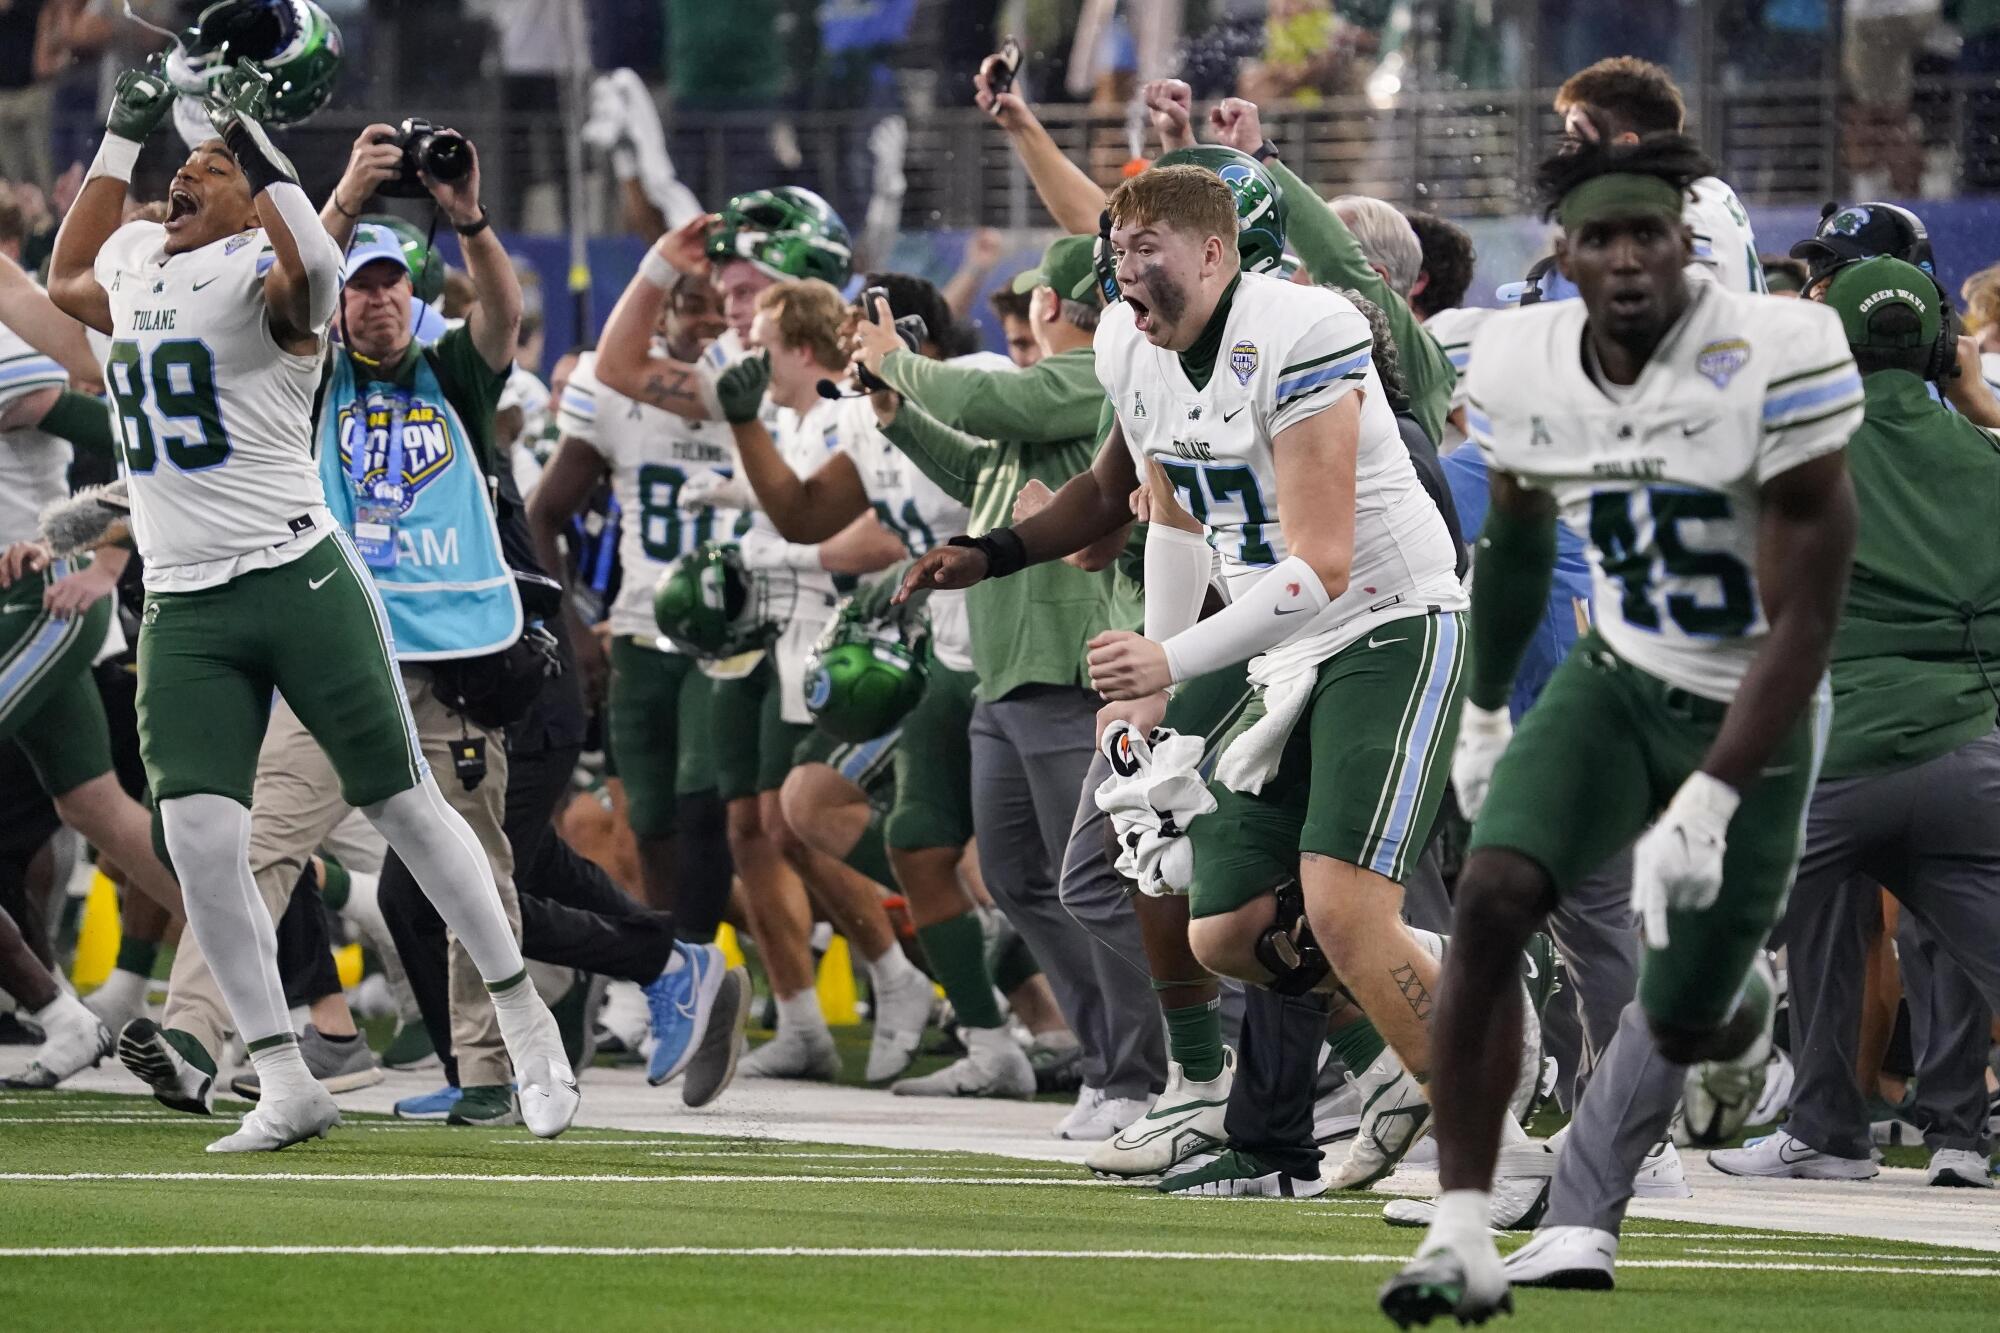 Tulane players and coaches celebrate immediately after defeating USC in the Cotton Bowl.